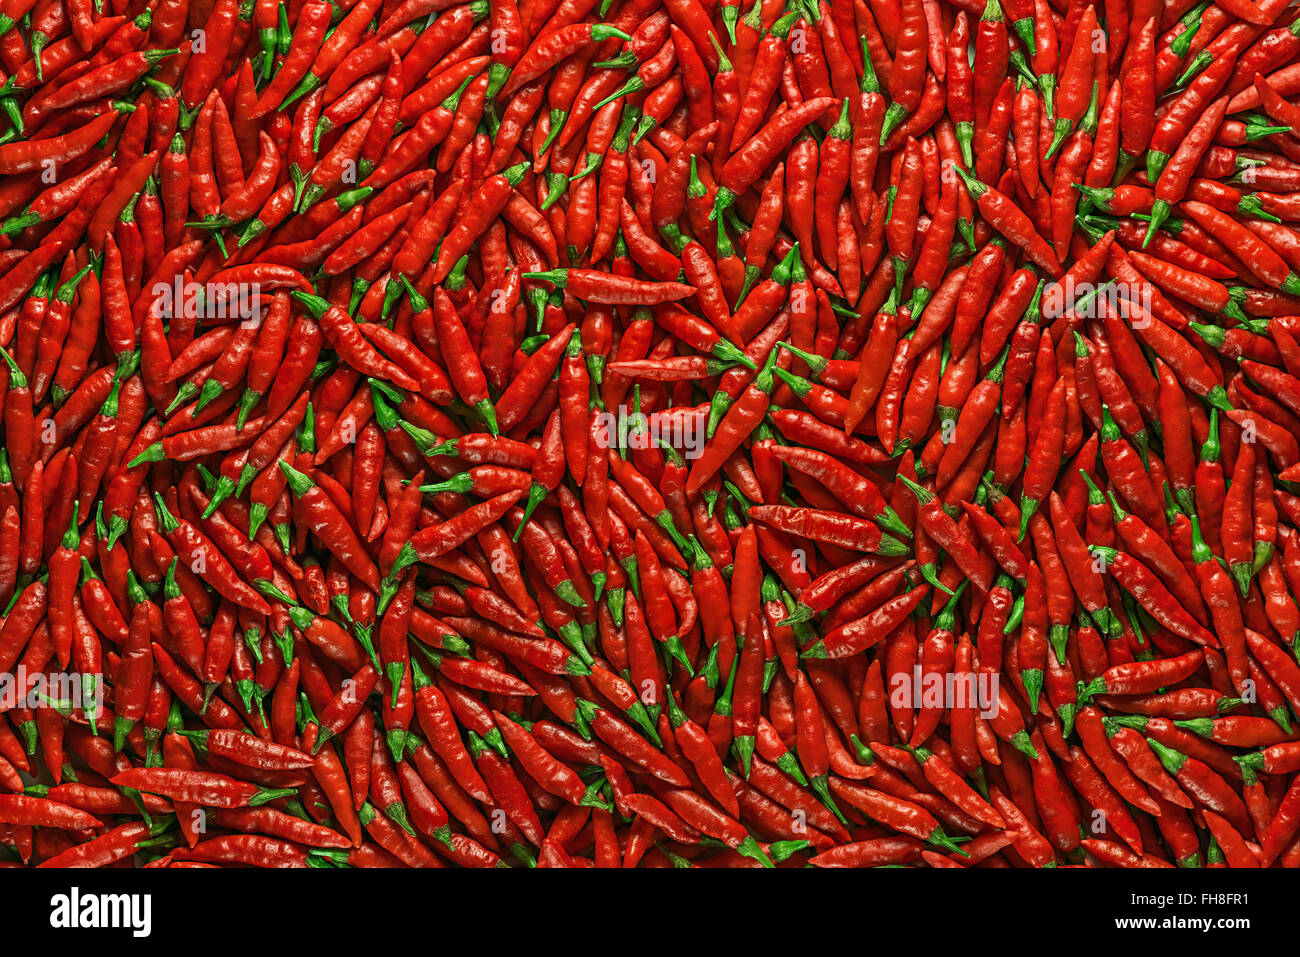 Red peppers on a flat surface. Image for use as background. Stock Photo